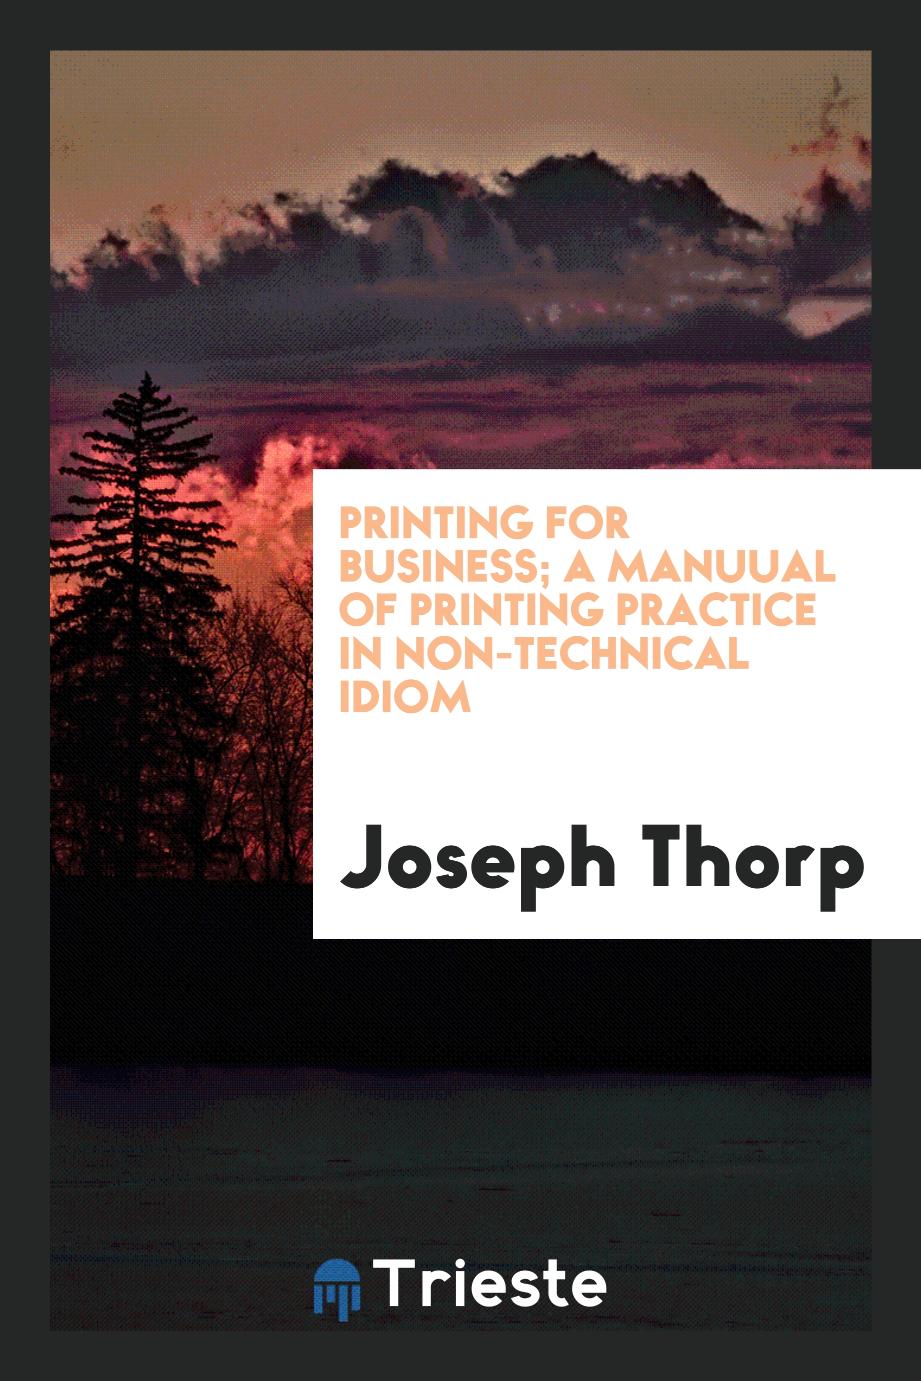 Printing for business; a manuual of printing practice in non-technical idiom